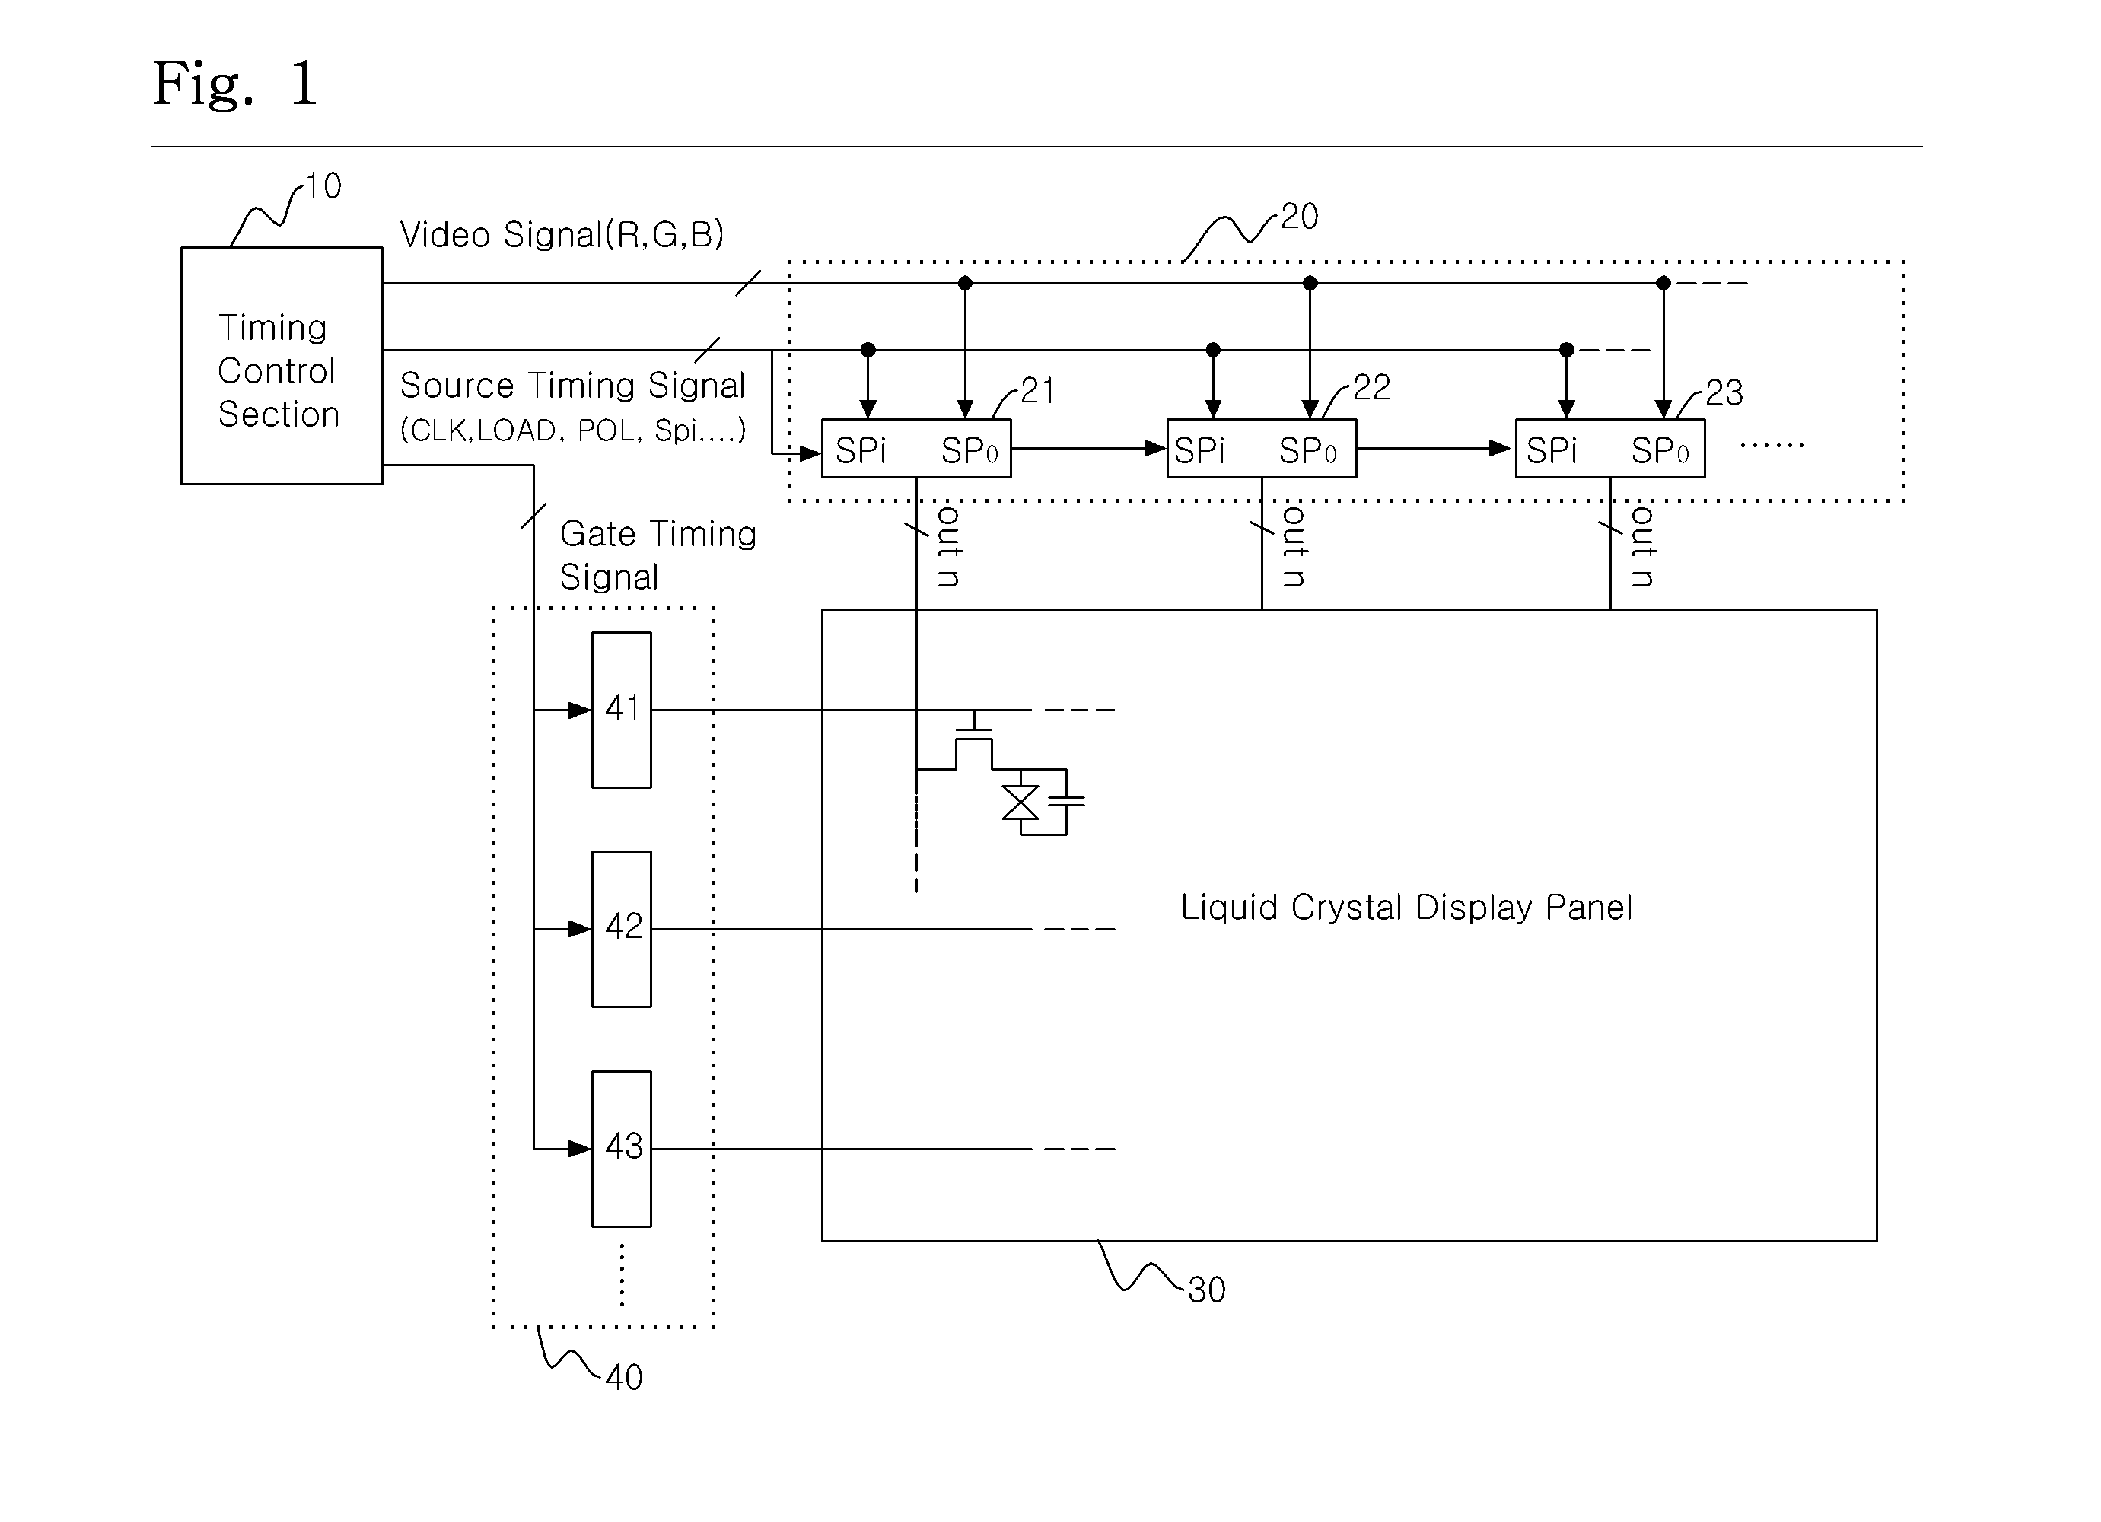 Pad layout structure of a driver IC chip